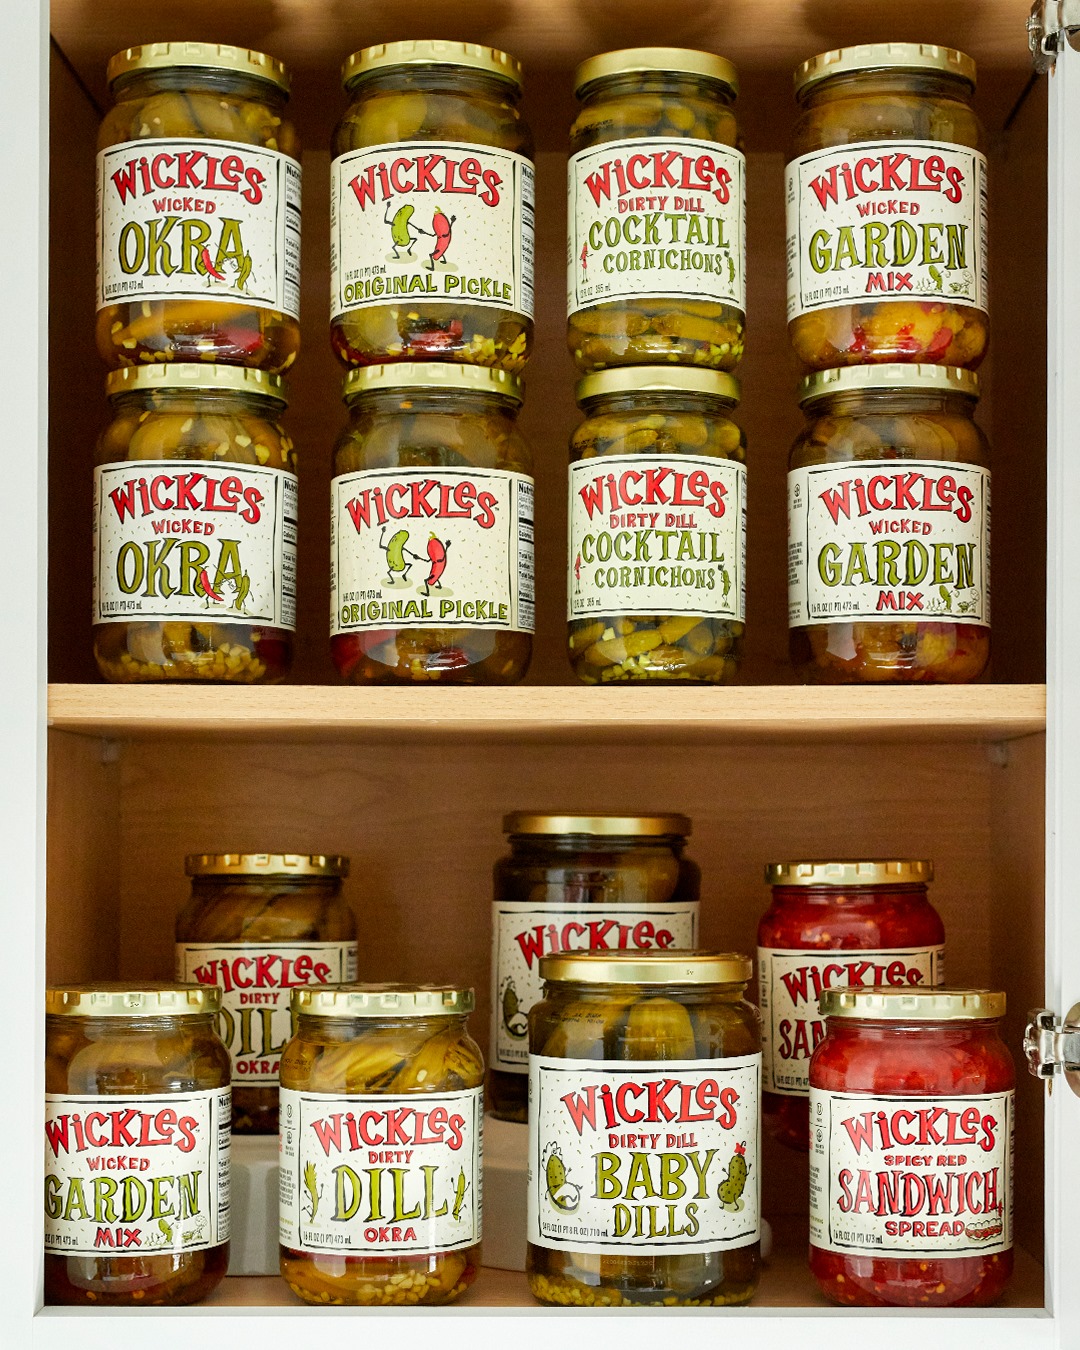 Wickles Pickles Review